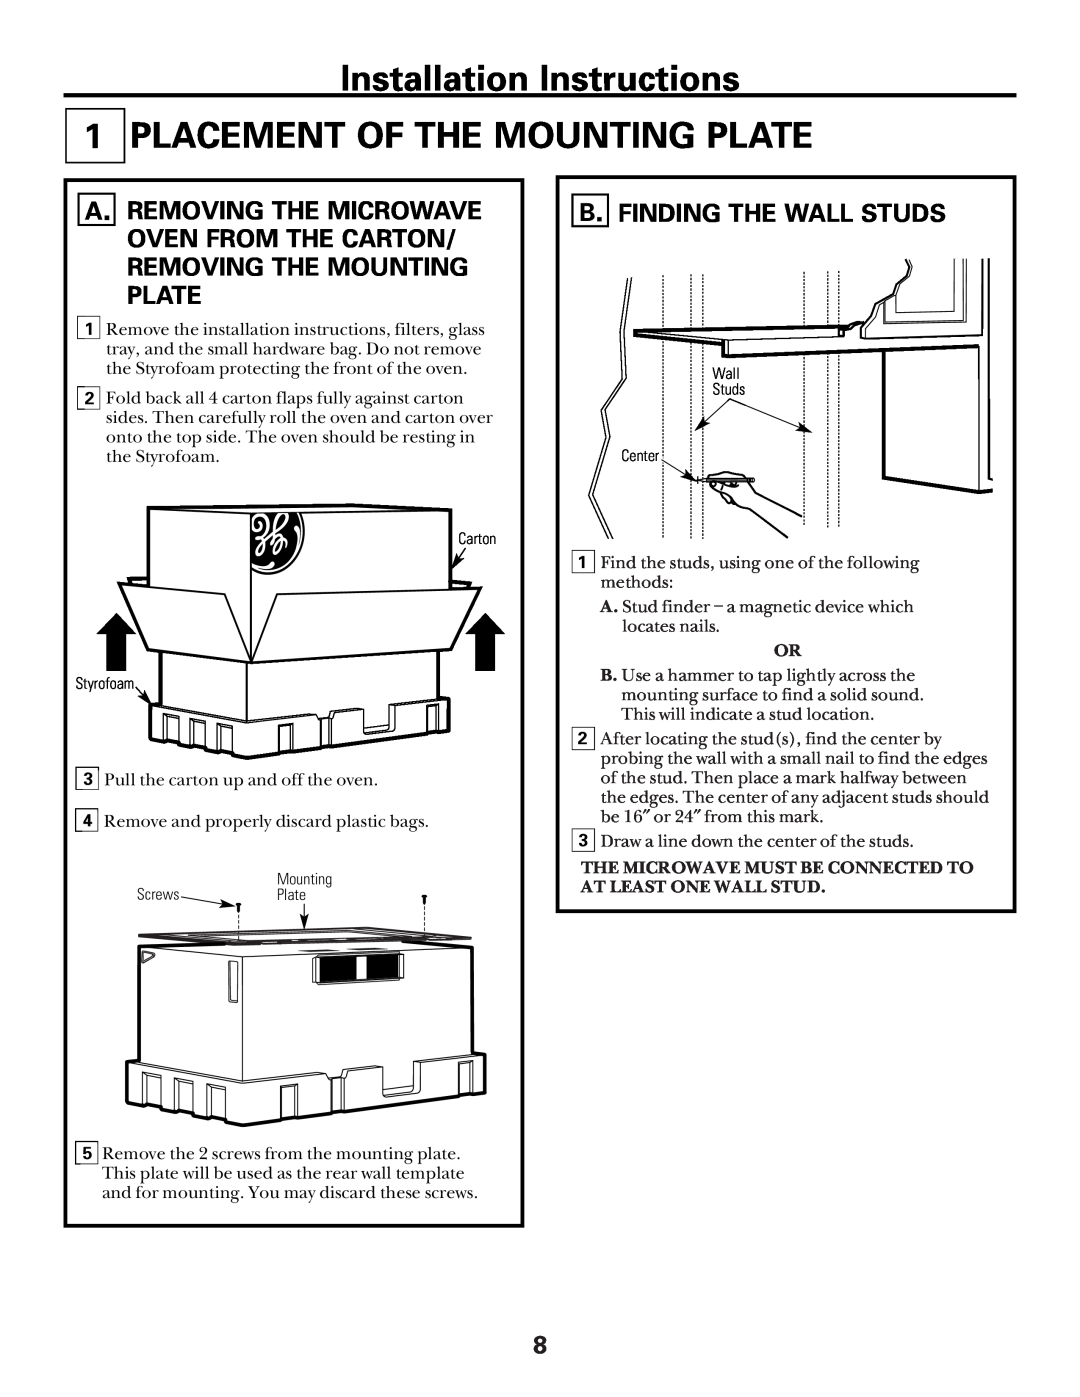 GE Over the Range Microwave Oven Installation Instructions 1 PLACEMENT OF THE MOUNTING PLATE, B. Finding The Wall Studs 